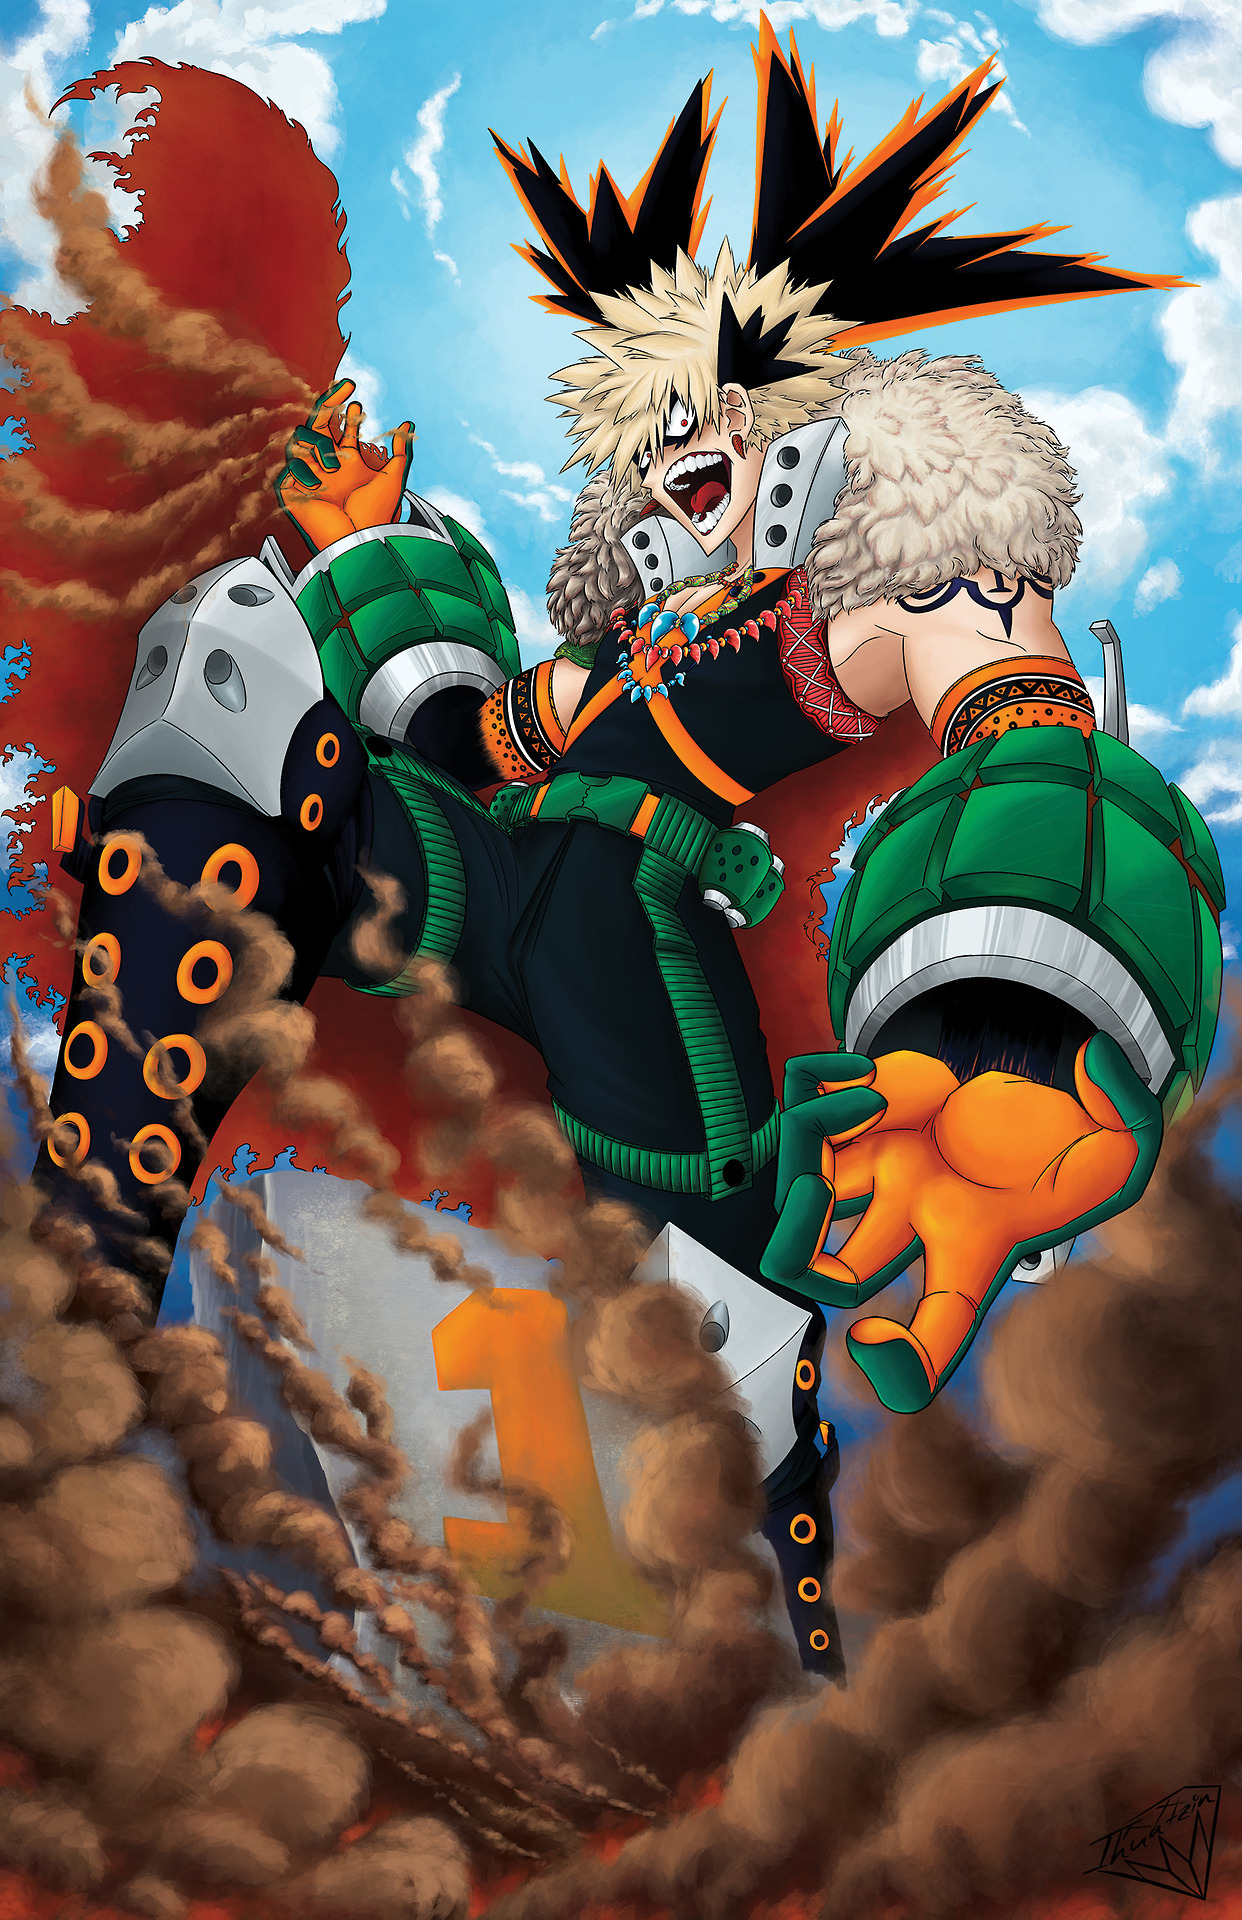 ihuatzin: King of Explodo-kills is DONE I’ll have him as a 11 x 17 print at Anime